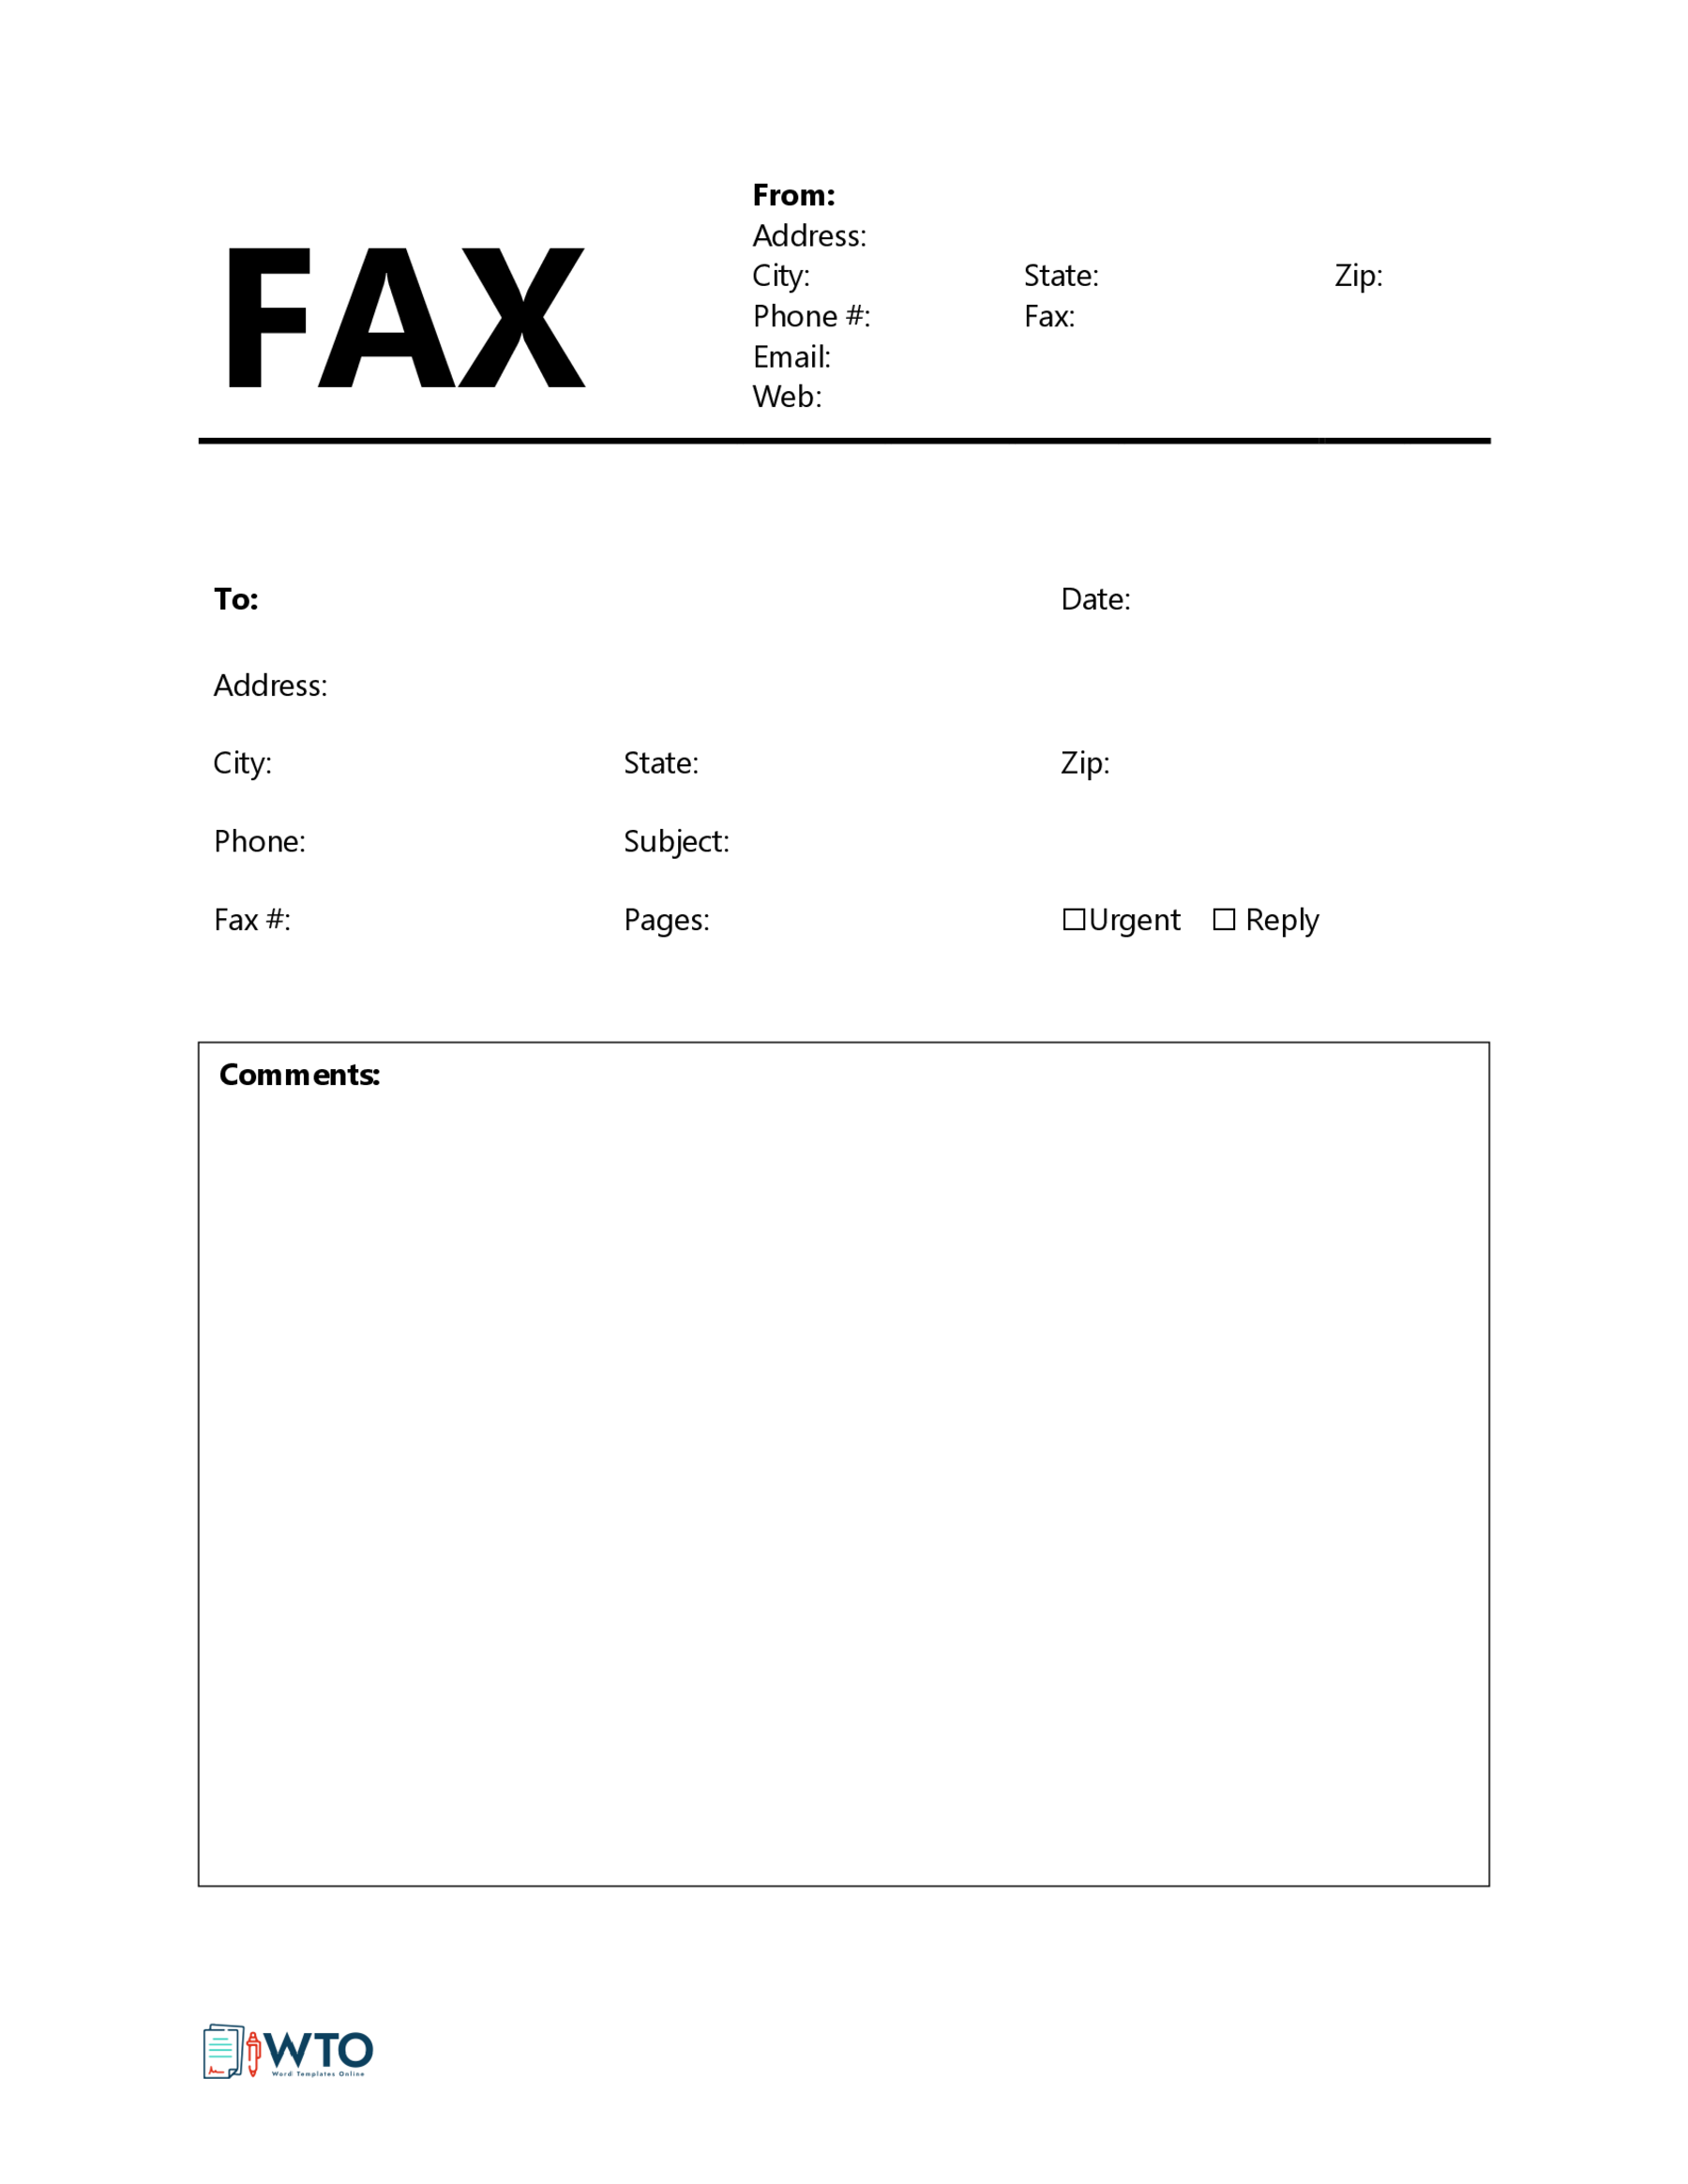 Fax Cover Sheet Blank Format